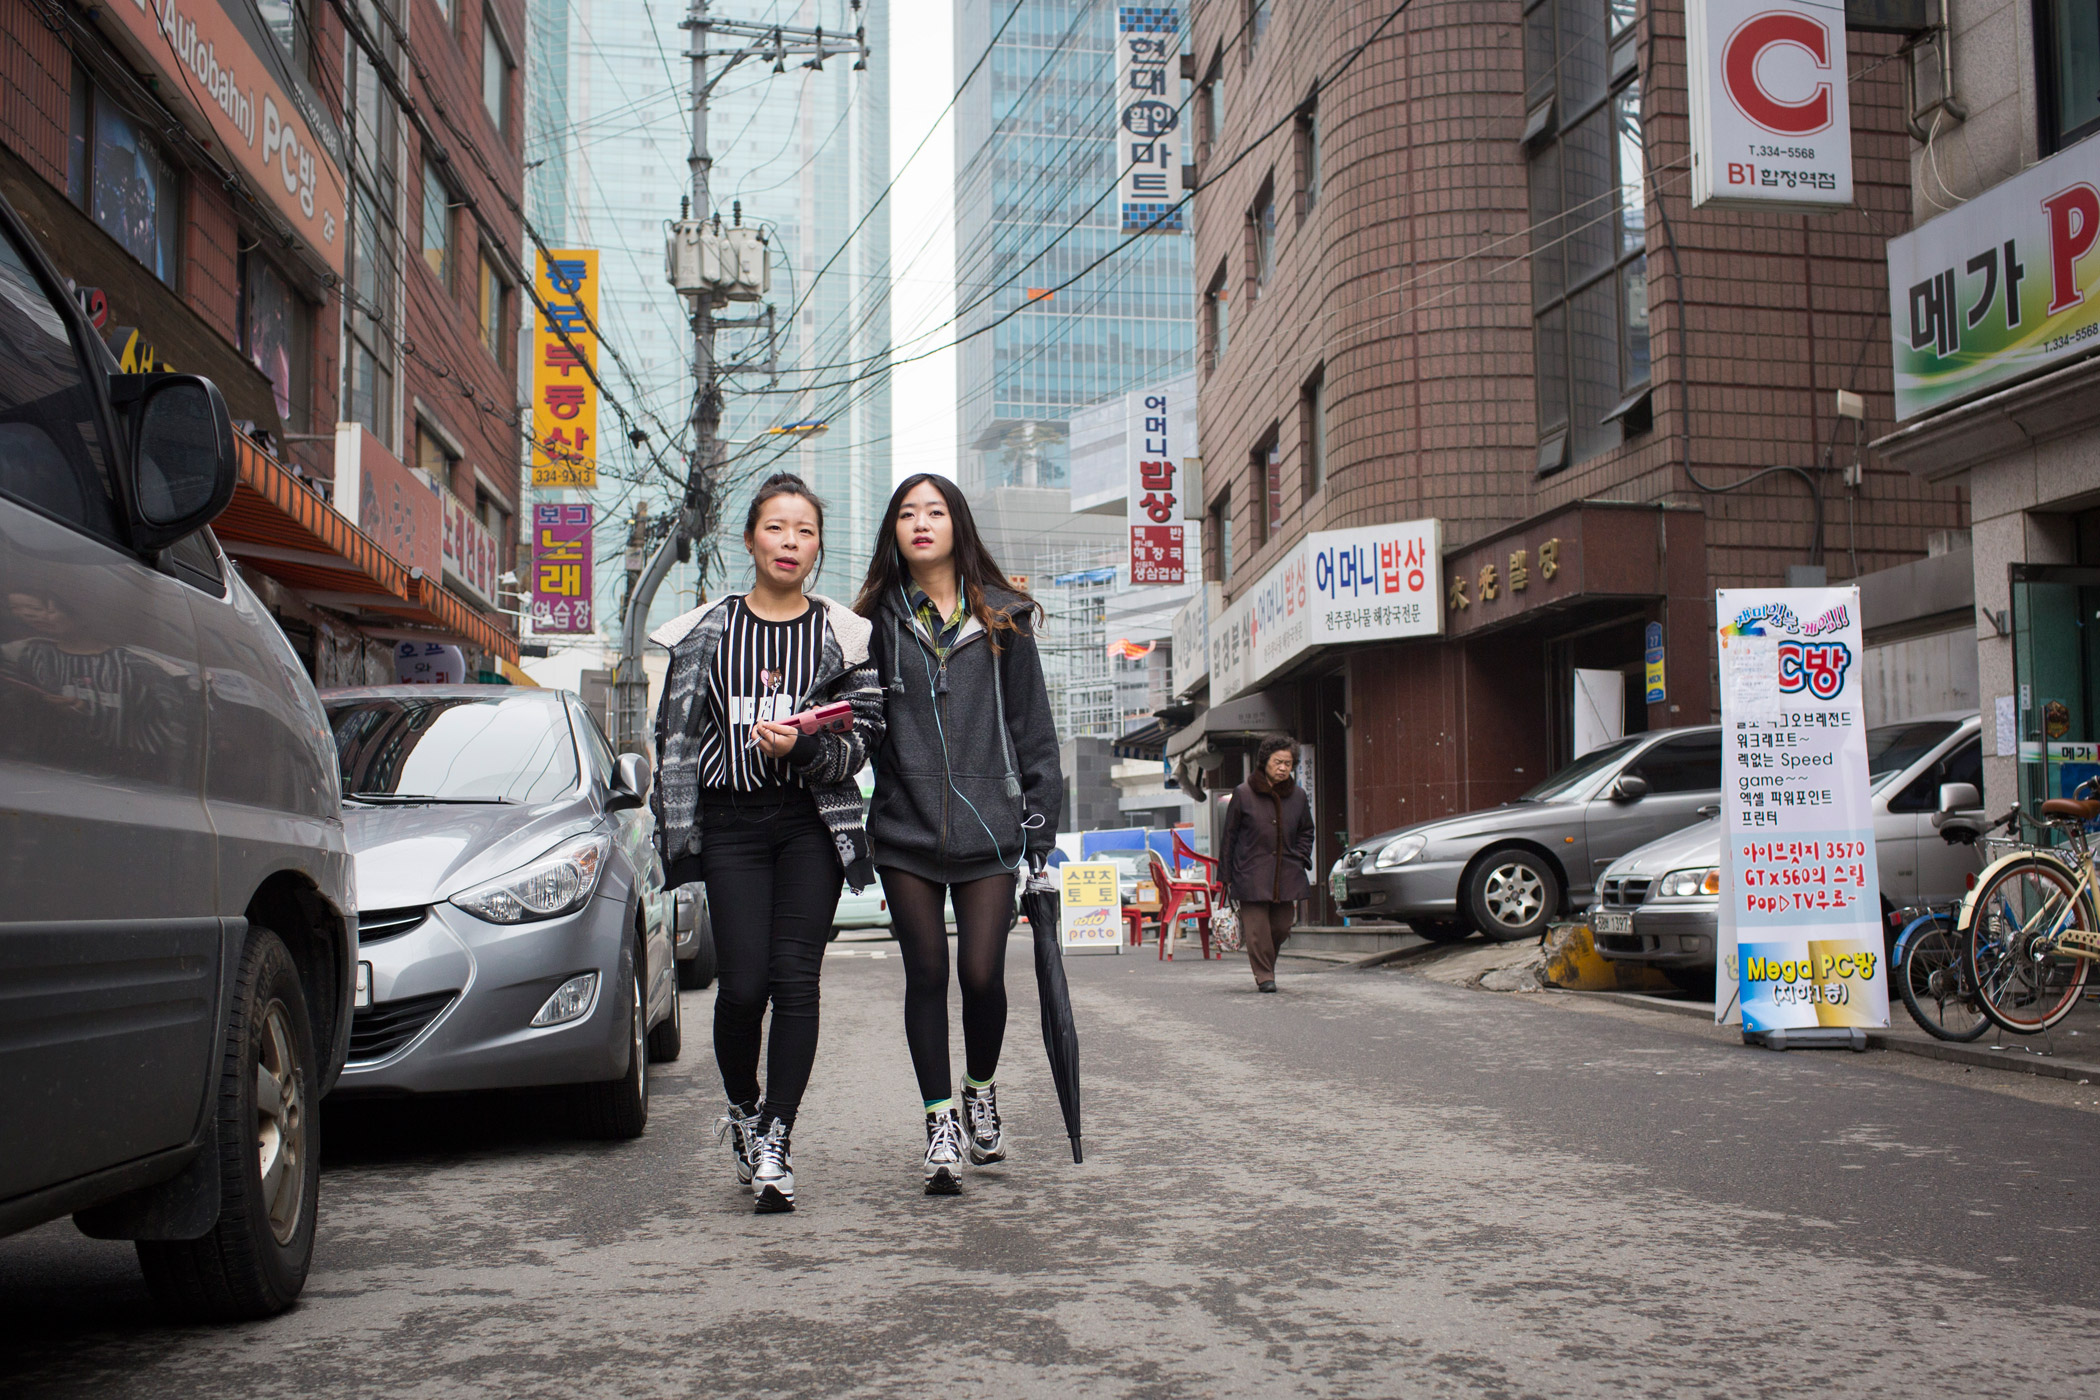 Donning matching shoes, North Korean refugees Kim Kyong-ok, 19 (Lunar age), and Sarah (English name used in order to protect source), 22, walk arm-in-arm on their way to a Christian church service on Feb. 21, 2015 near Hapjeong, Seoul, South Korea. The women met shortly after they each arrived separately in South Korea at a resettlement camp for refugees. While adjusting to life after North Korea has been challenging, their friendship is a source of strength and solidarity. Caitlin O'Hara